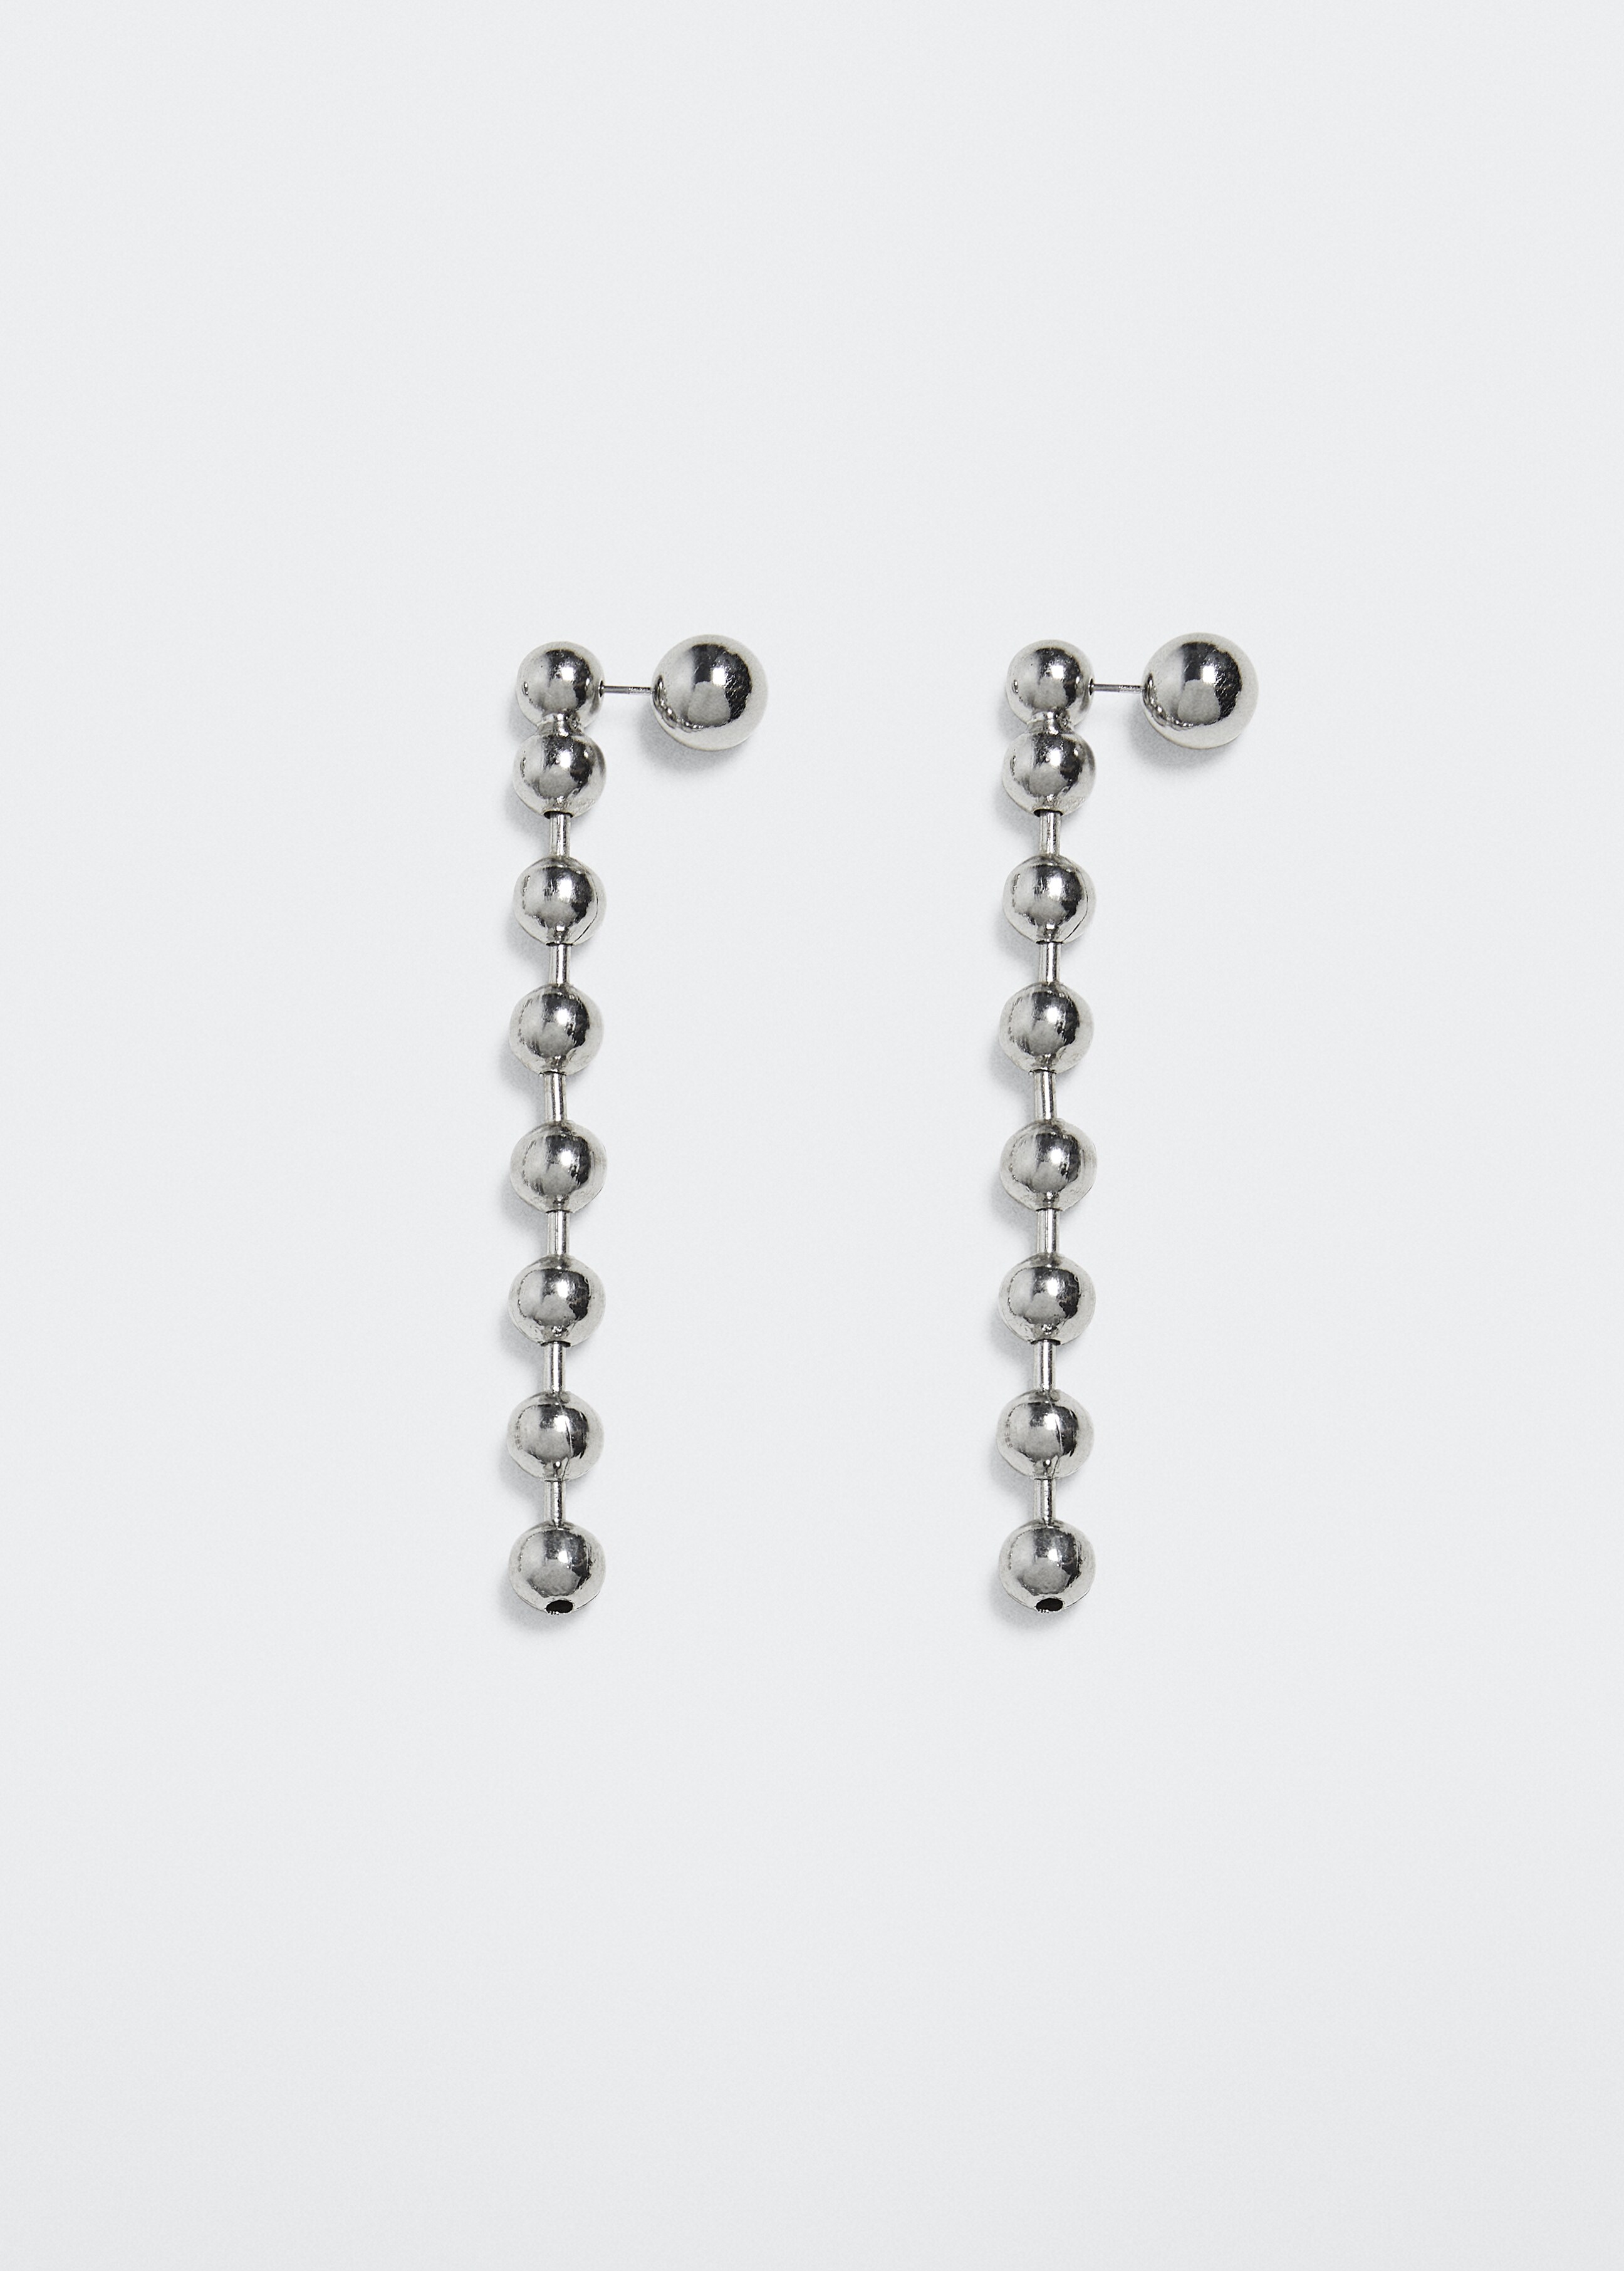 Metal bead earrings - Article without model